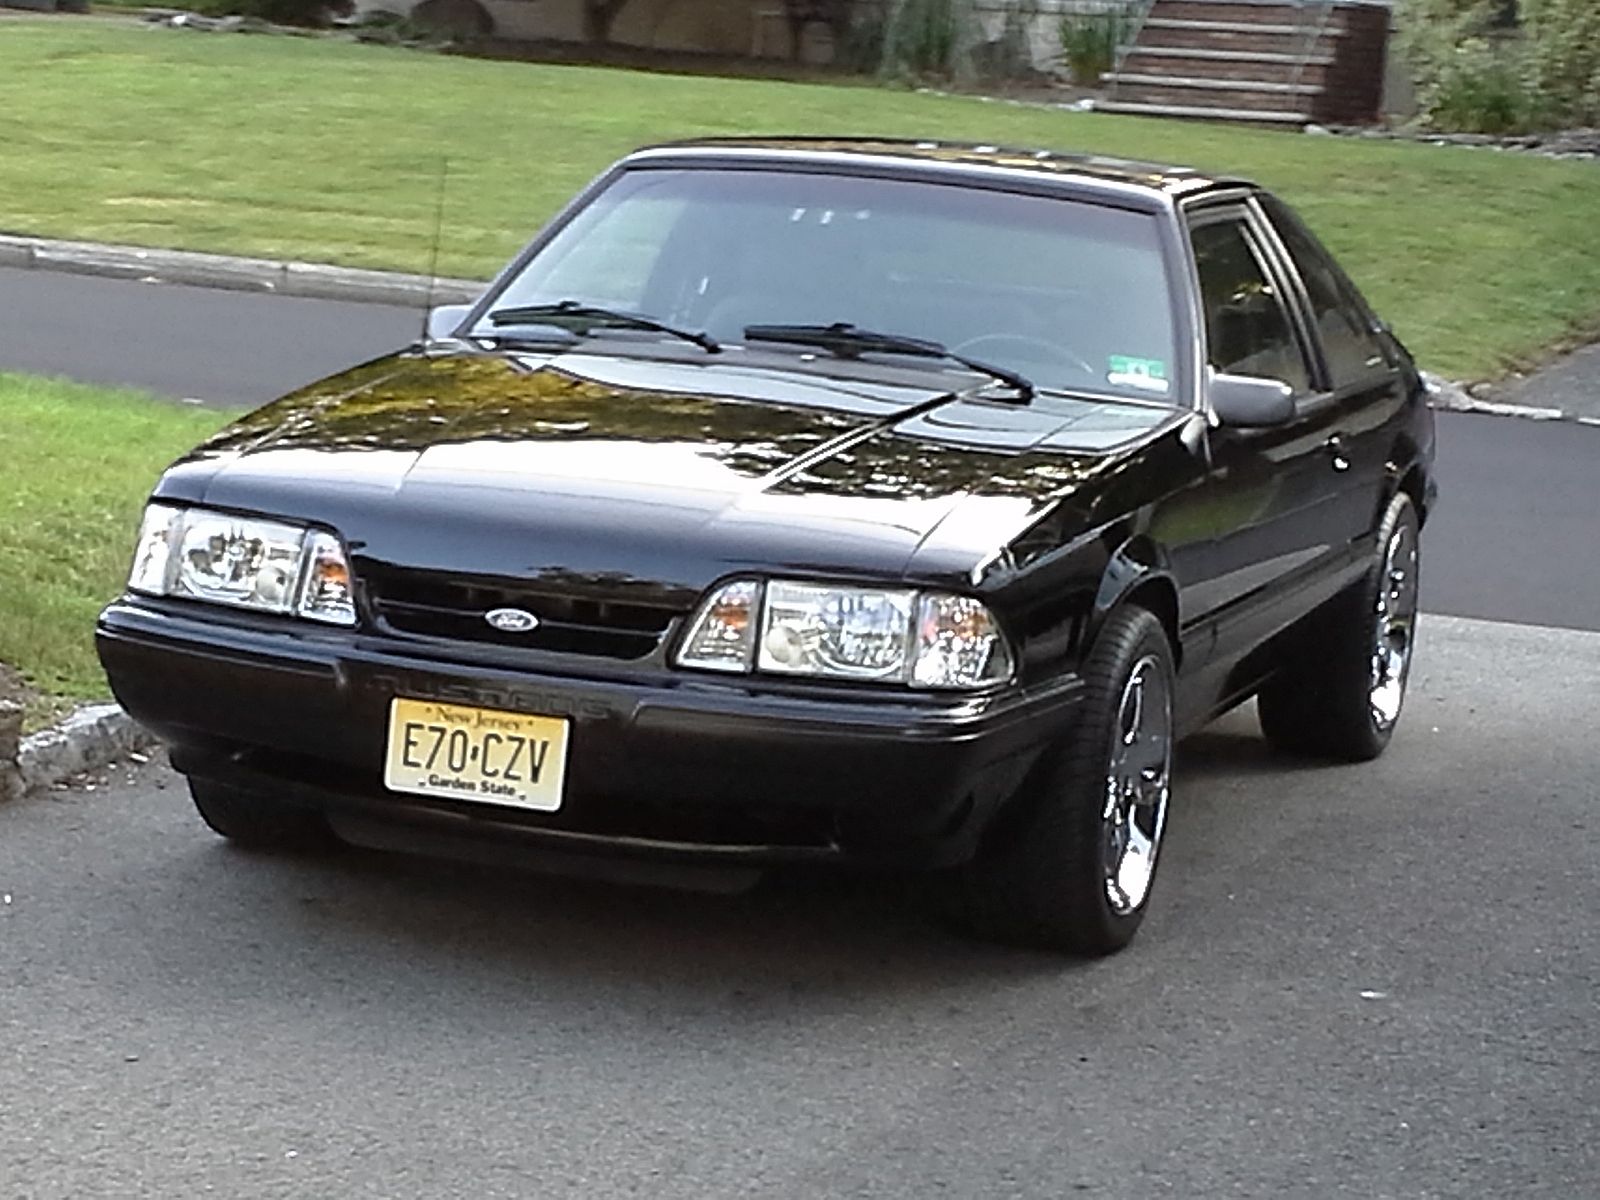 Stang front pic.jpg